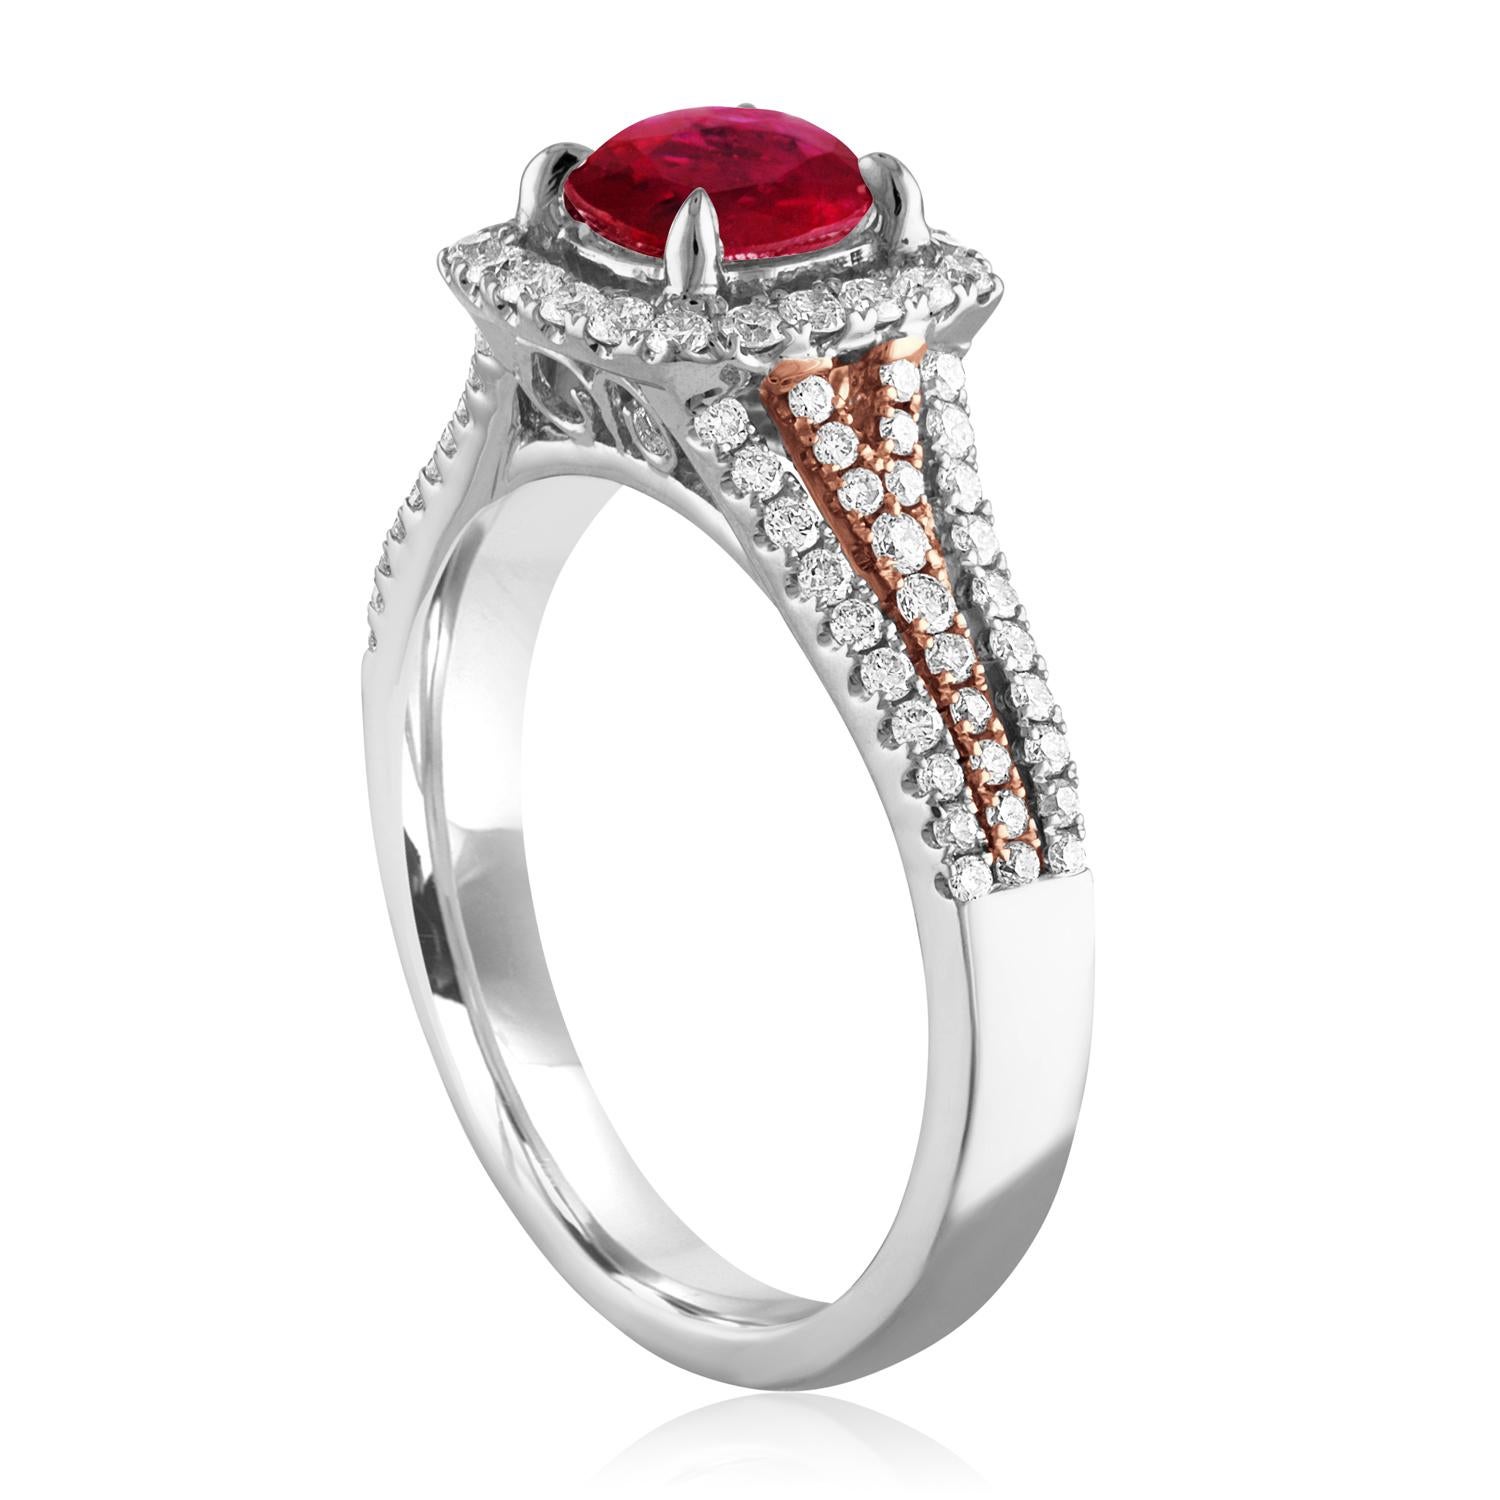 Beautiful Square Halo Two Tone Ring
The ring is 18K White & Rose Gold
The Center Stone is a Round Ruby 1.09 Carats
The Ruby is AGL Certified Heated
There are 0.54 Carats in Diamonds F/G VS/SI
The ring is a size 6.5, sizable.
The ring weighs 4.4 grams